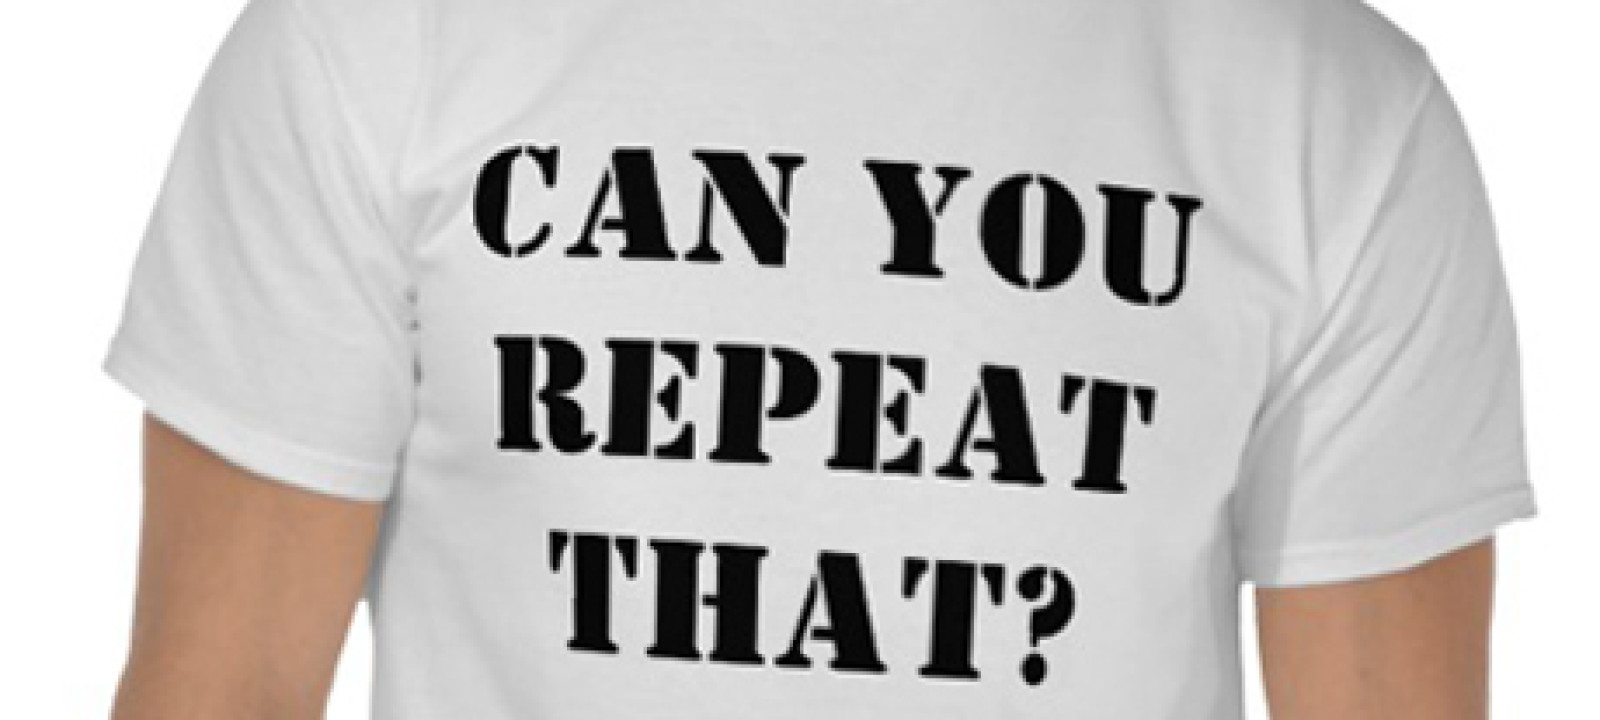 Can-You-Repeat-That-460x300-1600x720.jpg